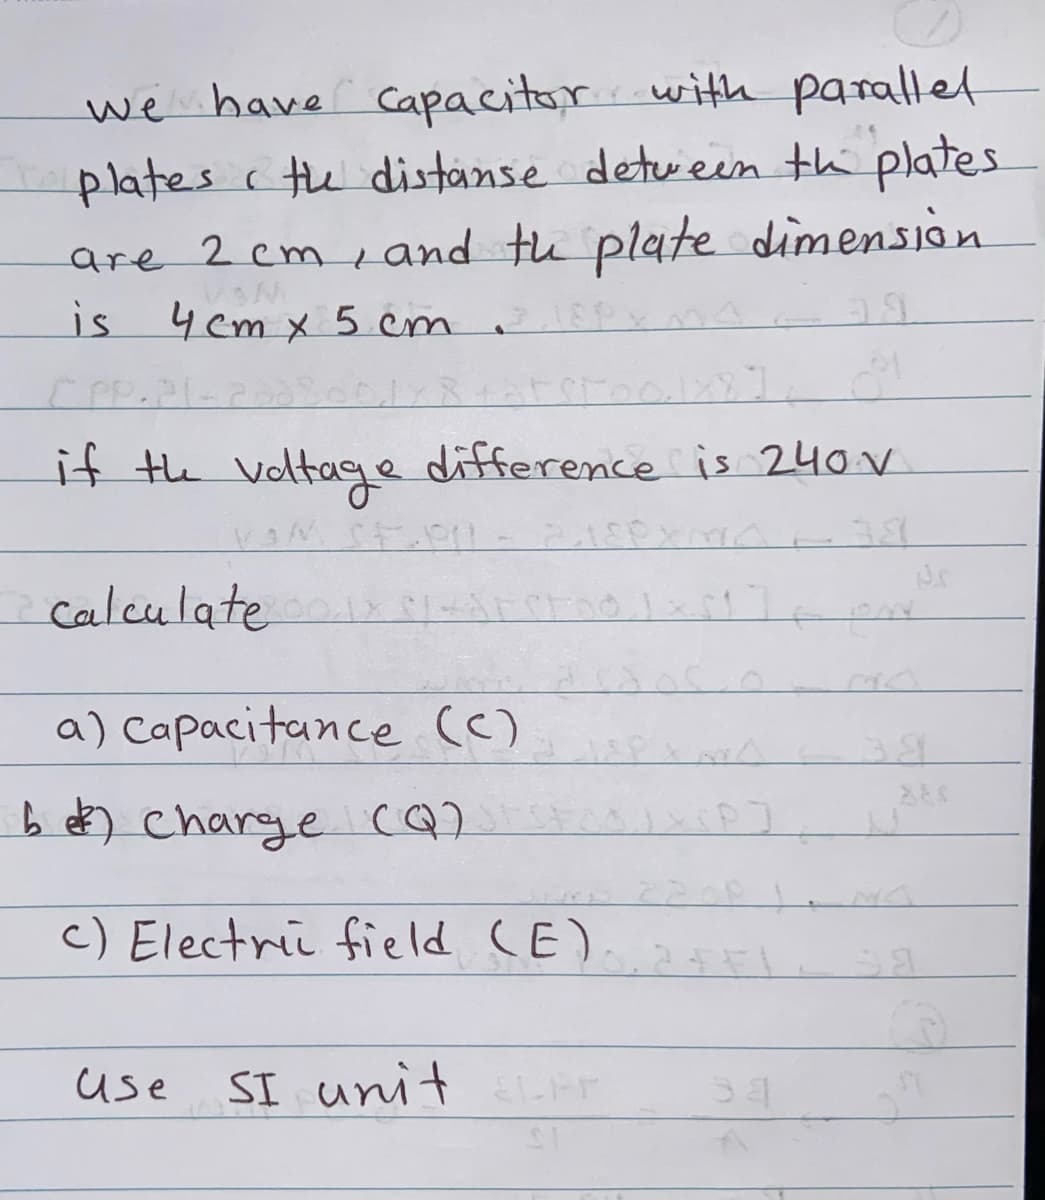 we have Capacitor with parallet
plates c the distanse detueen thi plates
are 2 cm e and th plate dimension
is 4 em x 5 cm
if the voltage difference is 240V
calculate
a) Capacitance (c)
b e) charge cQ)
c) Electri field CE)
SI unit
EL-FF
use
